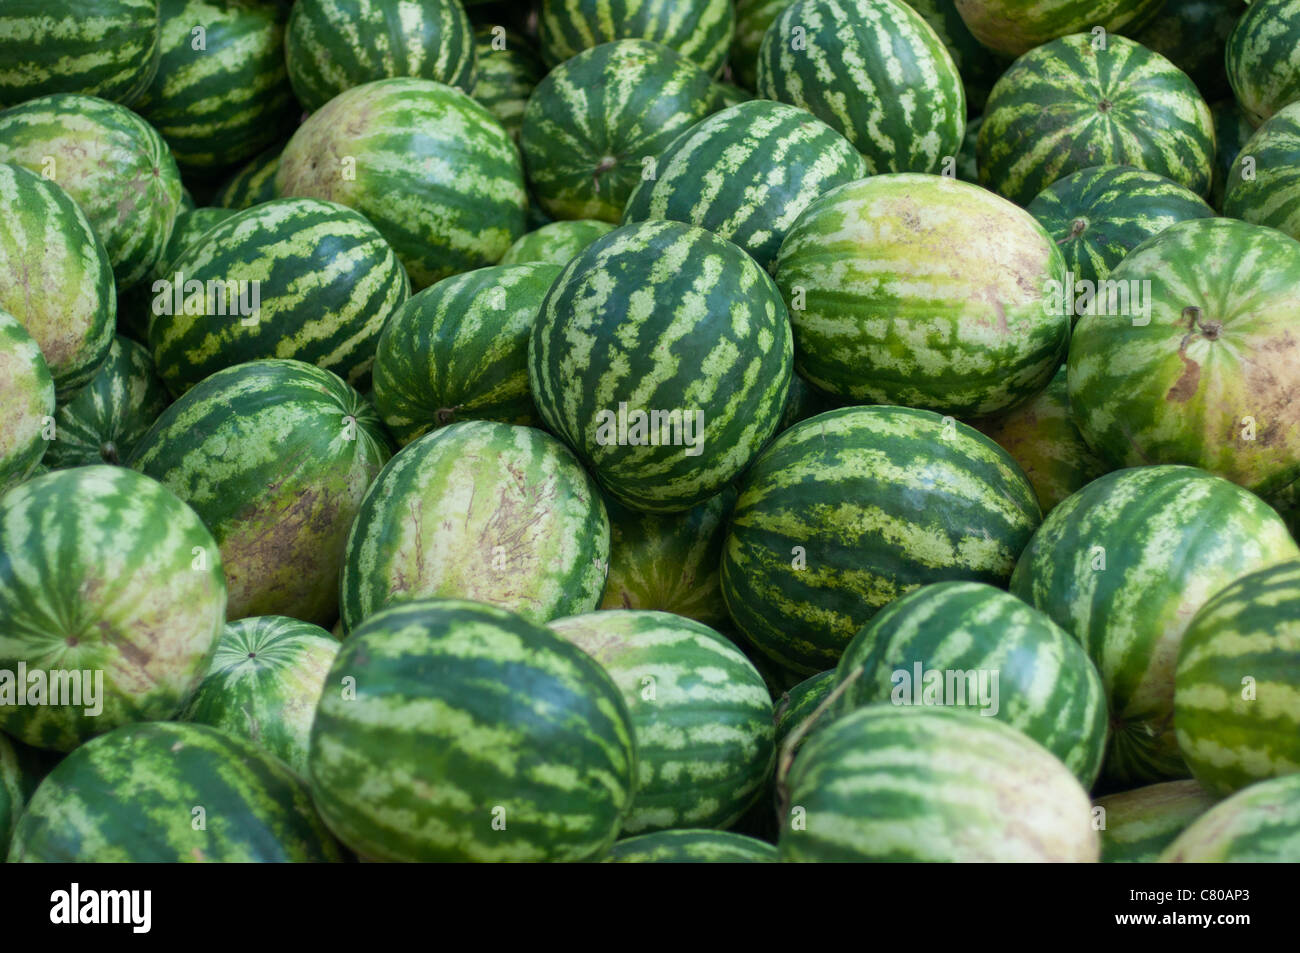 Water melons on sale in Istanbul, Turkey. Stock Photo